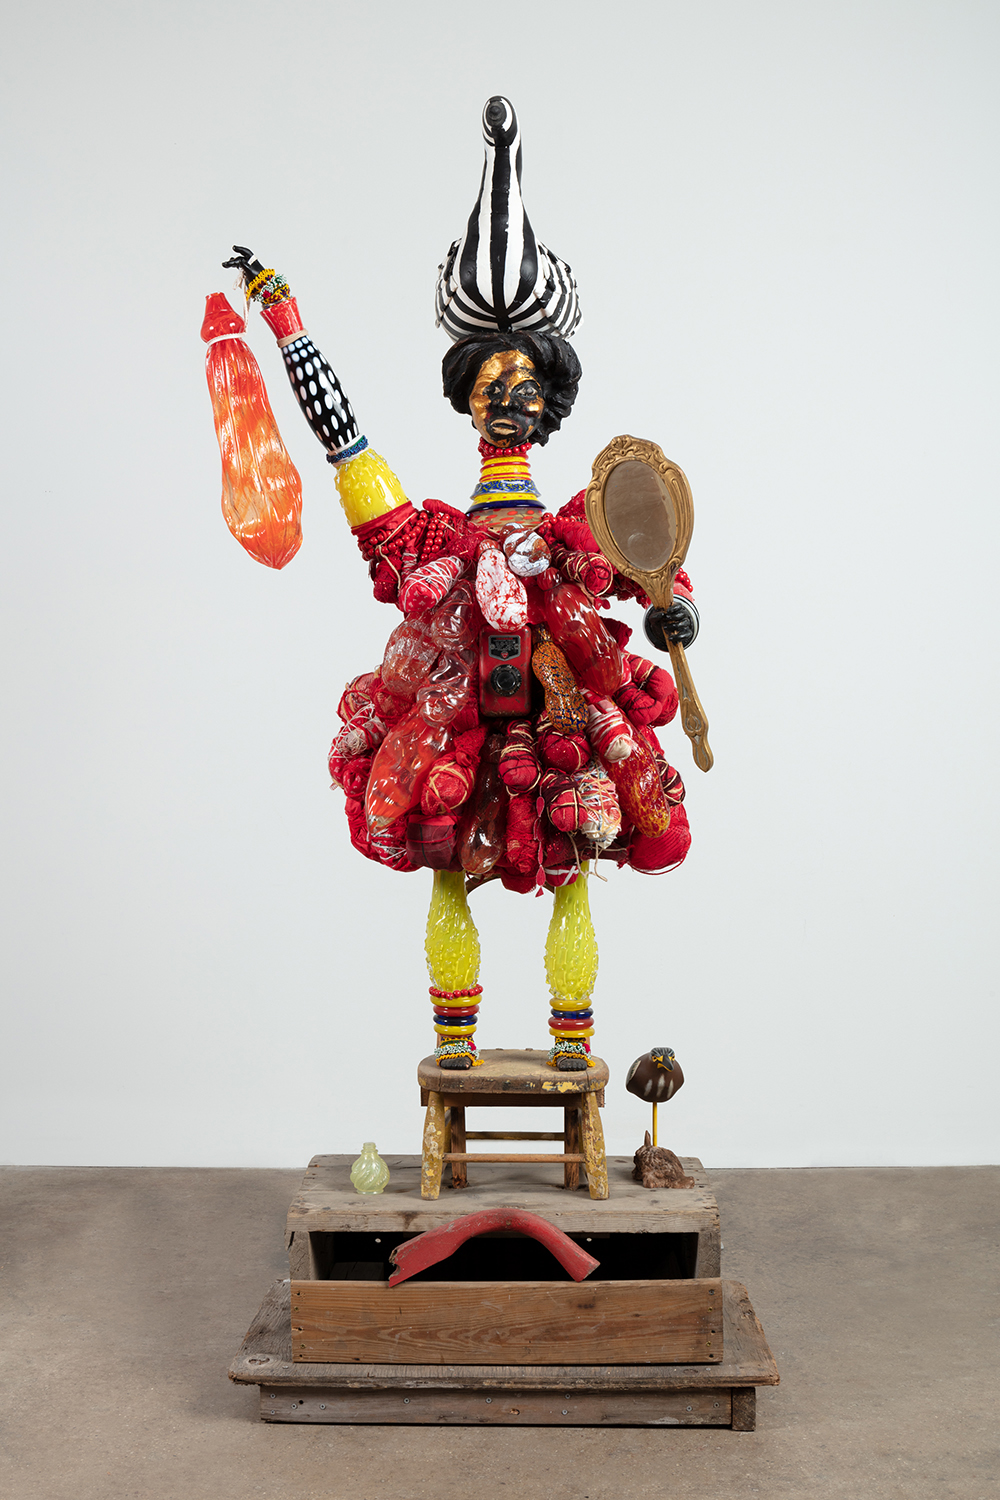 vanessa german, "The Blood & The Animals, The Mirror & The Sky; An ode to the unlanguage-able truth of is-ness", 2017. Mixed media assemblage. 77 ½ x 36 x 35 in. Courtesy of Kasmin Gallery, NYC.